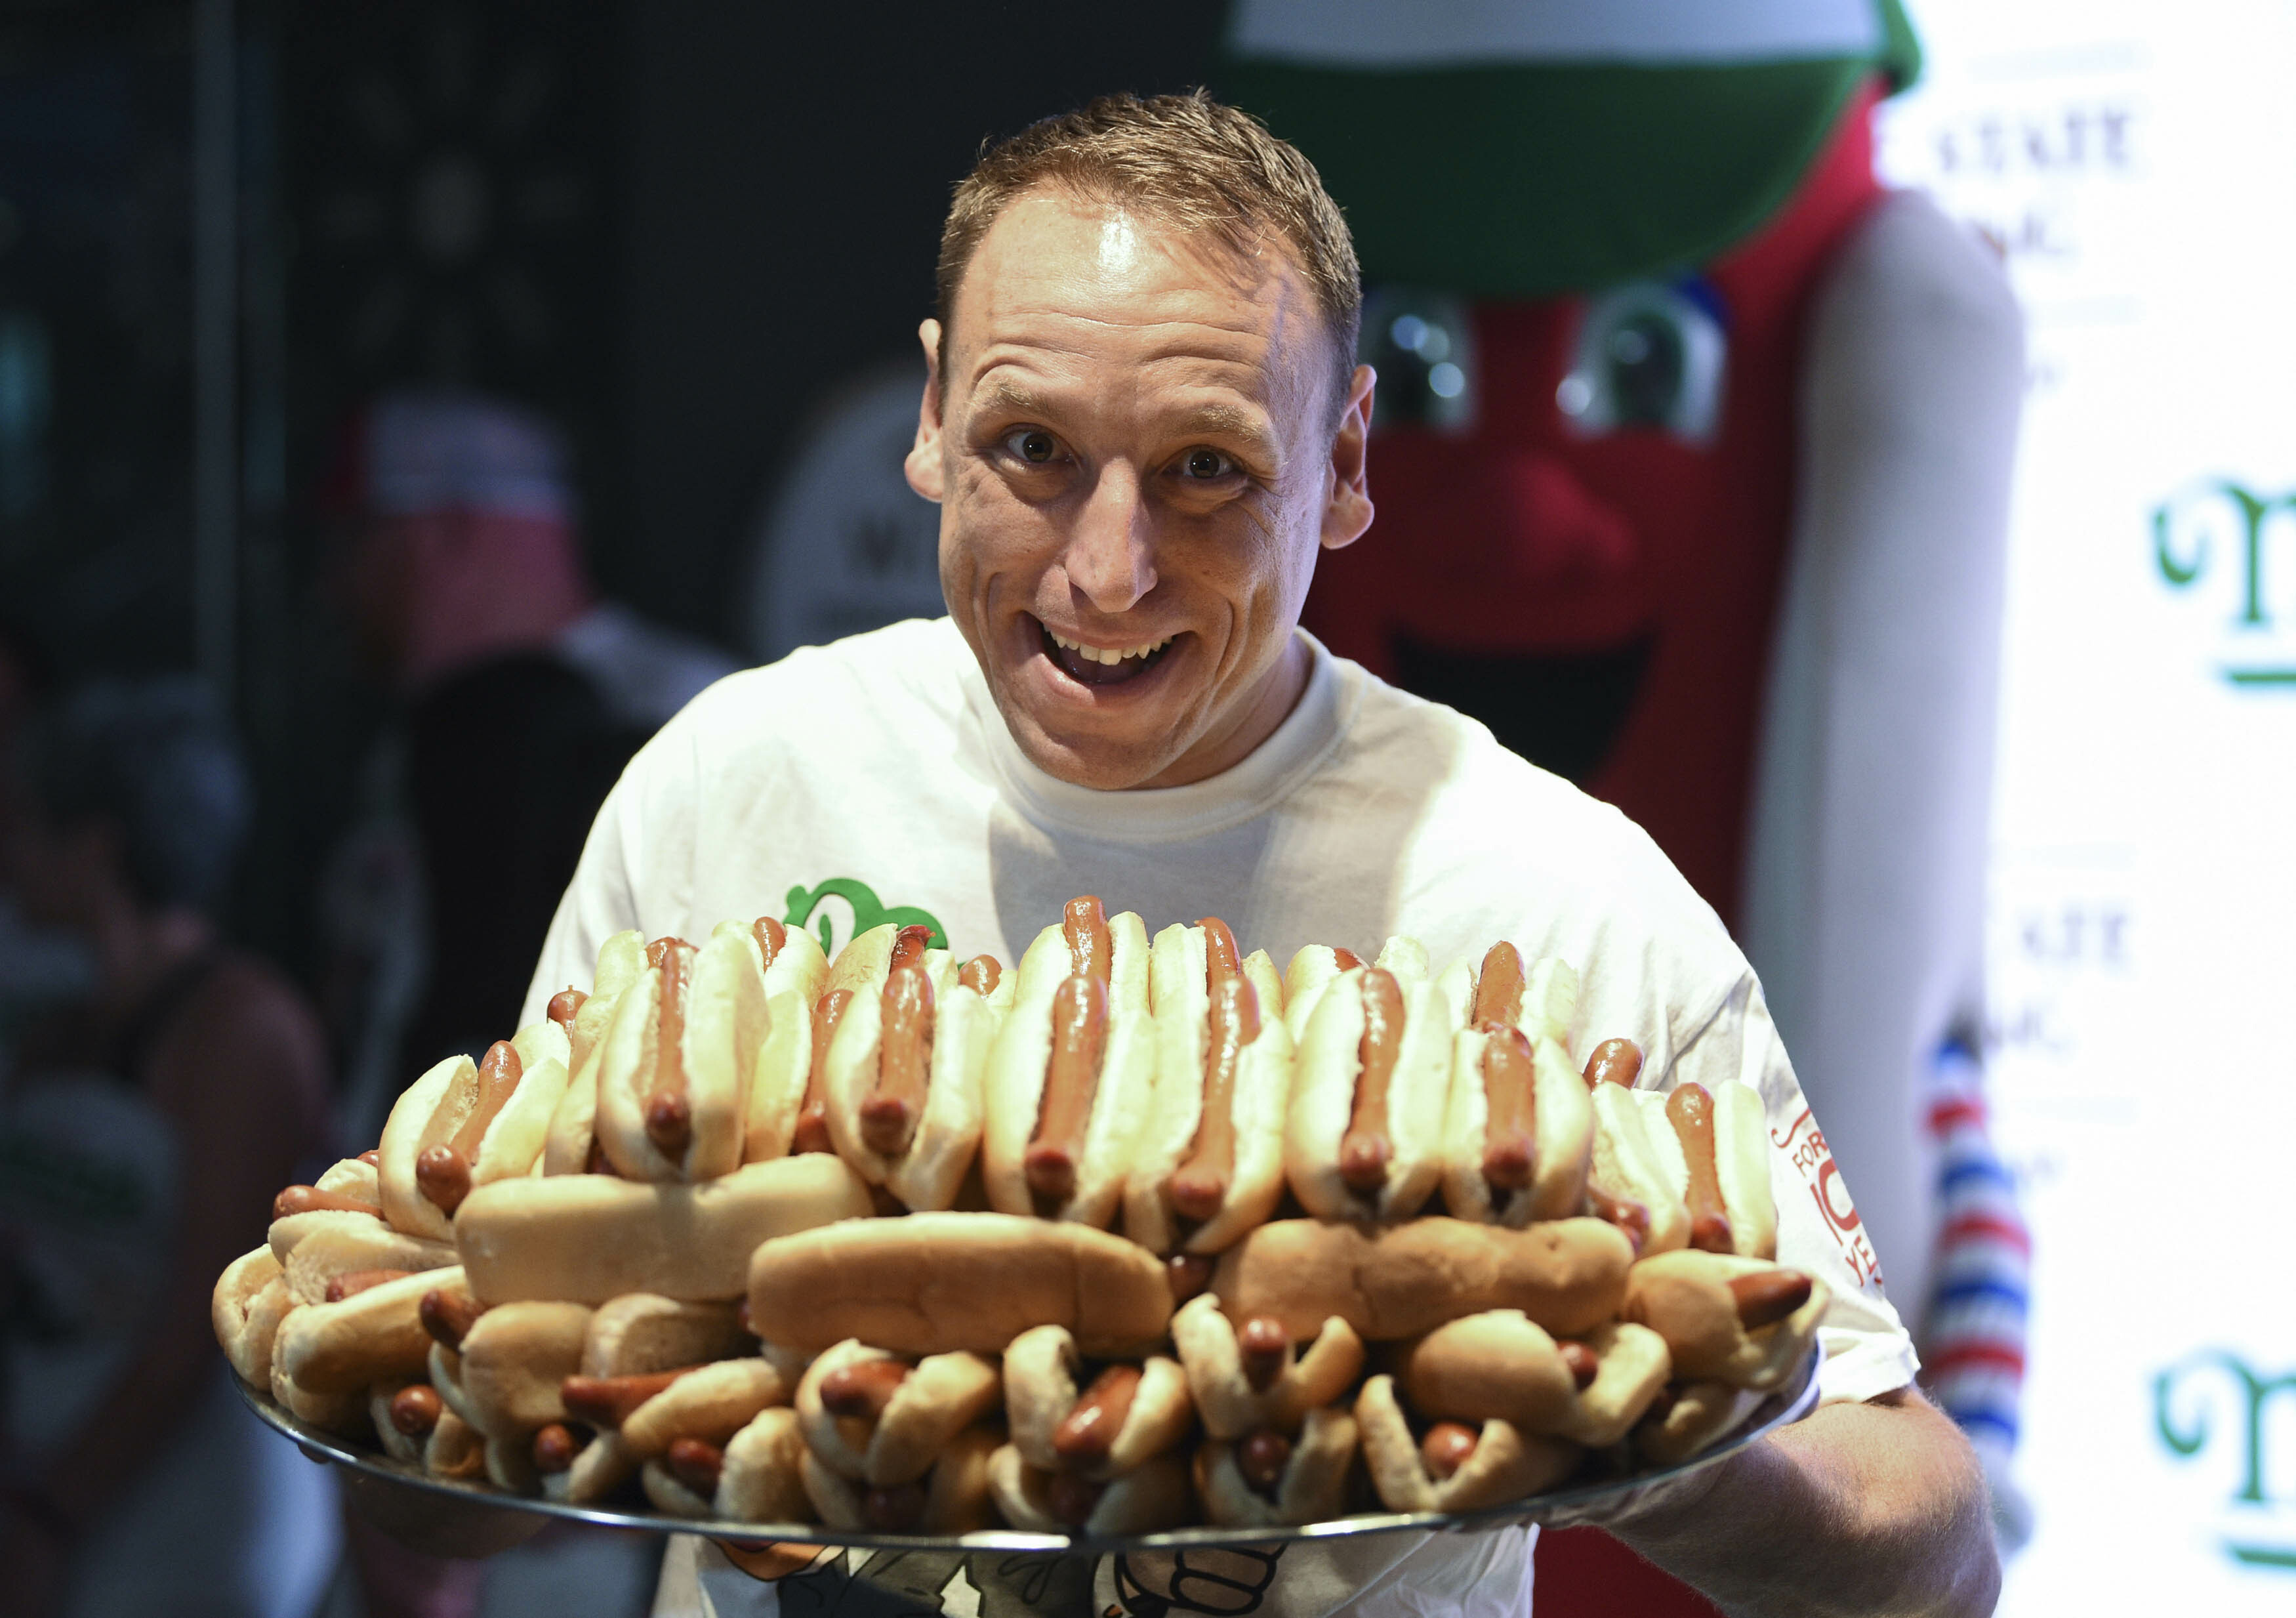 Hot Dog Eating Champ Joey Chestnut: I'll 'Do What It Takes' To Win ...